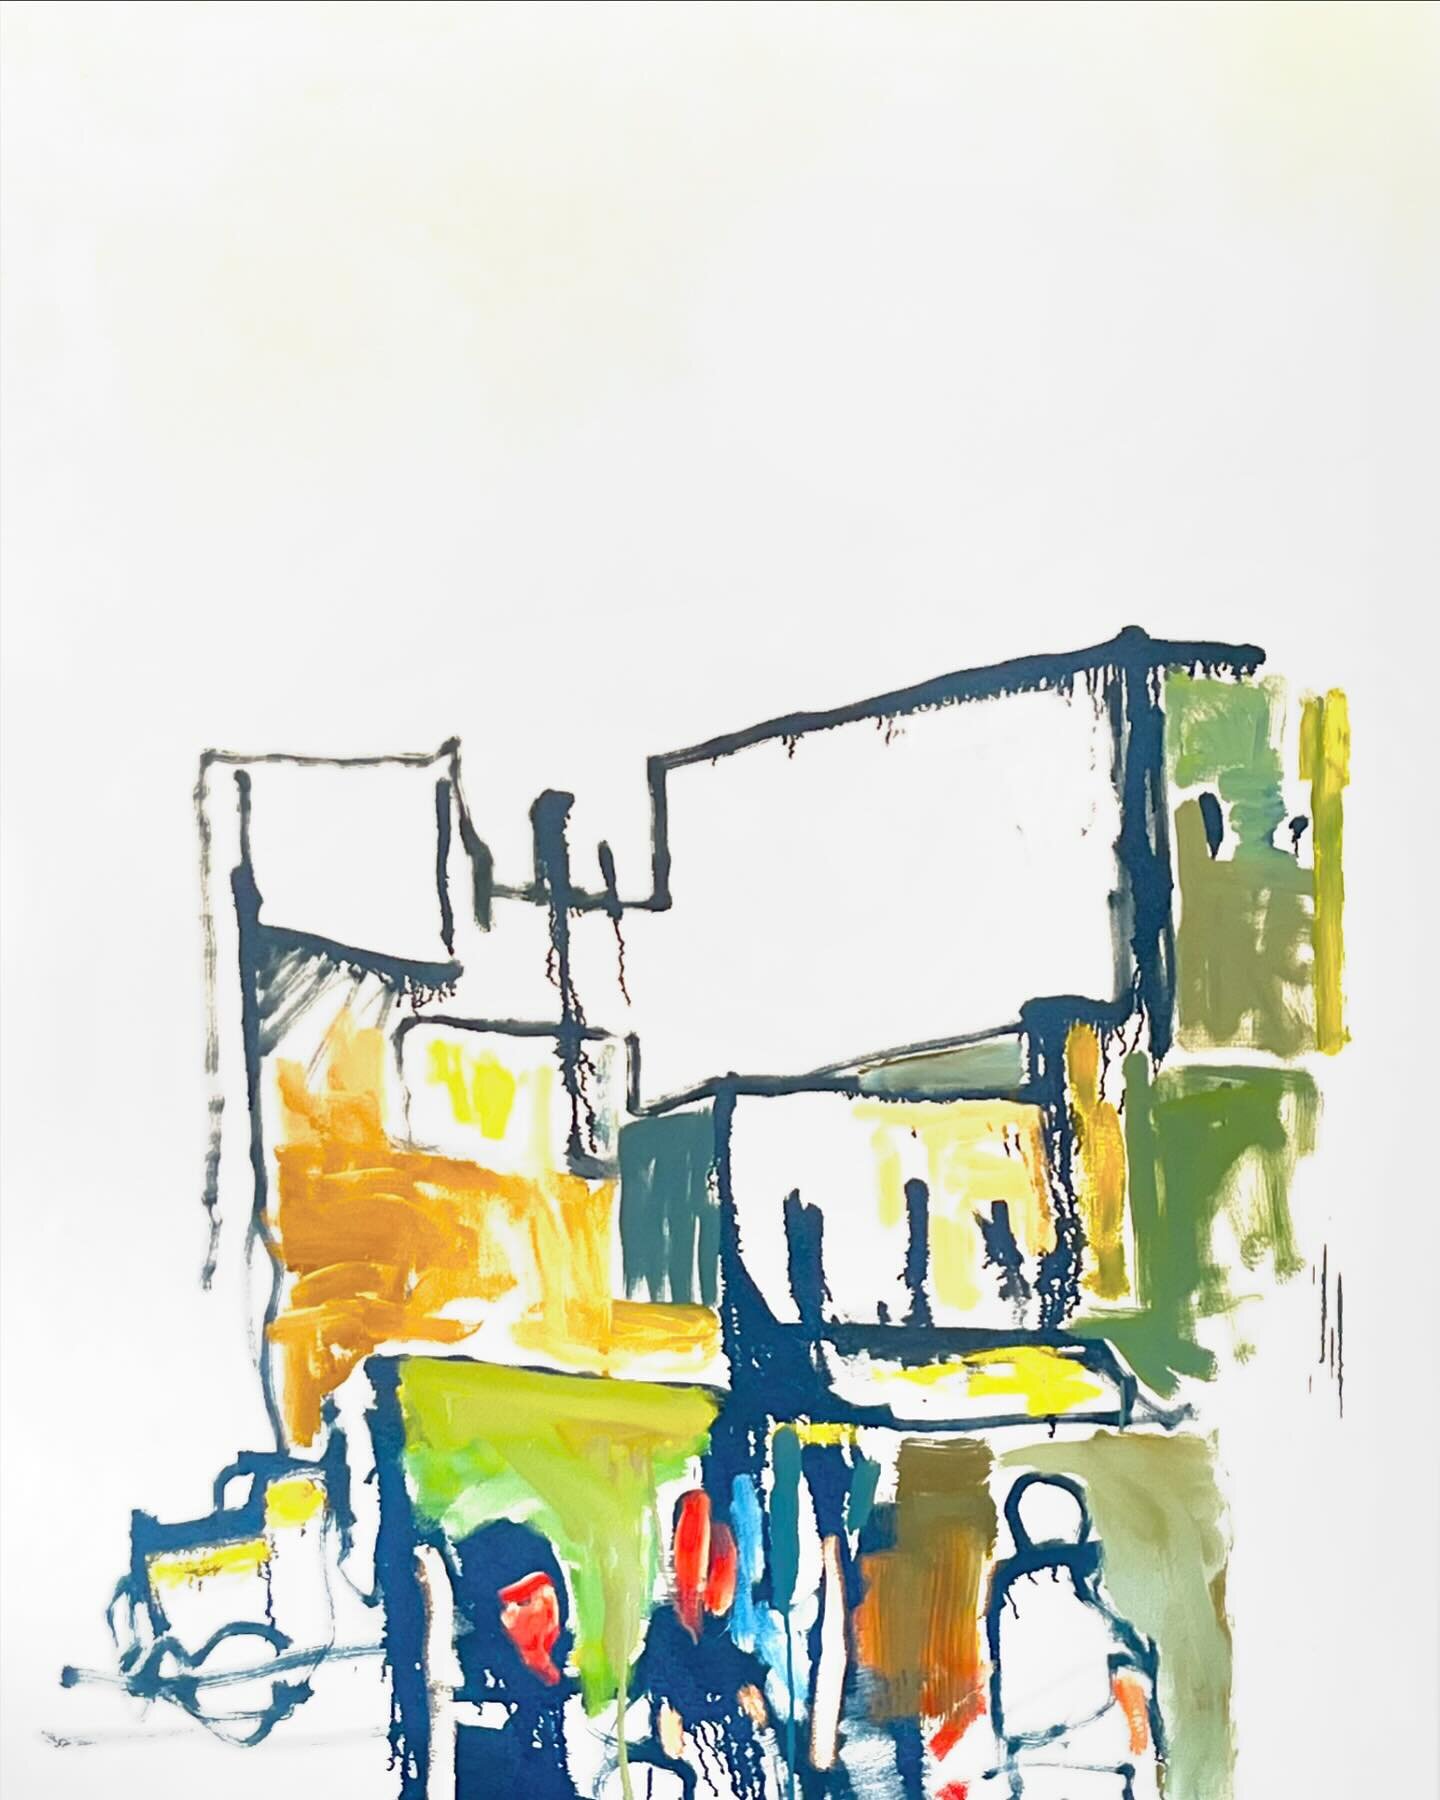 Just in - @mattschaeferartist &lsquo;s &ldquo;Urban Study&rdquo;! With just a few lines and strokes of color, Matt creates an expressive scene capturing the busyness of the city. Using negative space at the top of the painting, he emphasizes and juxt